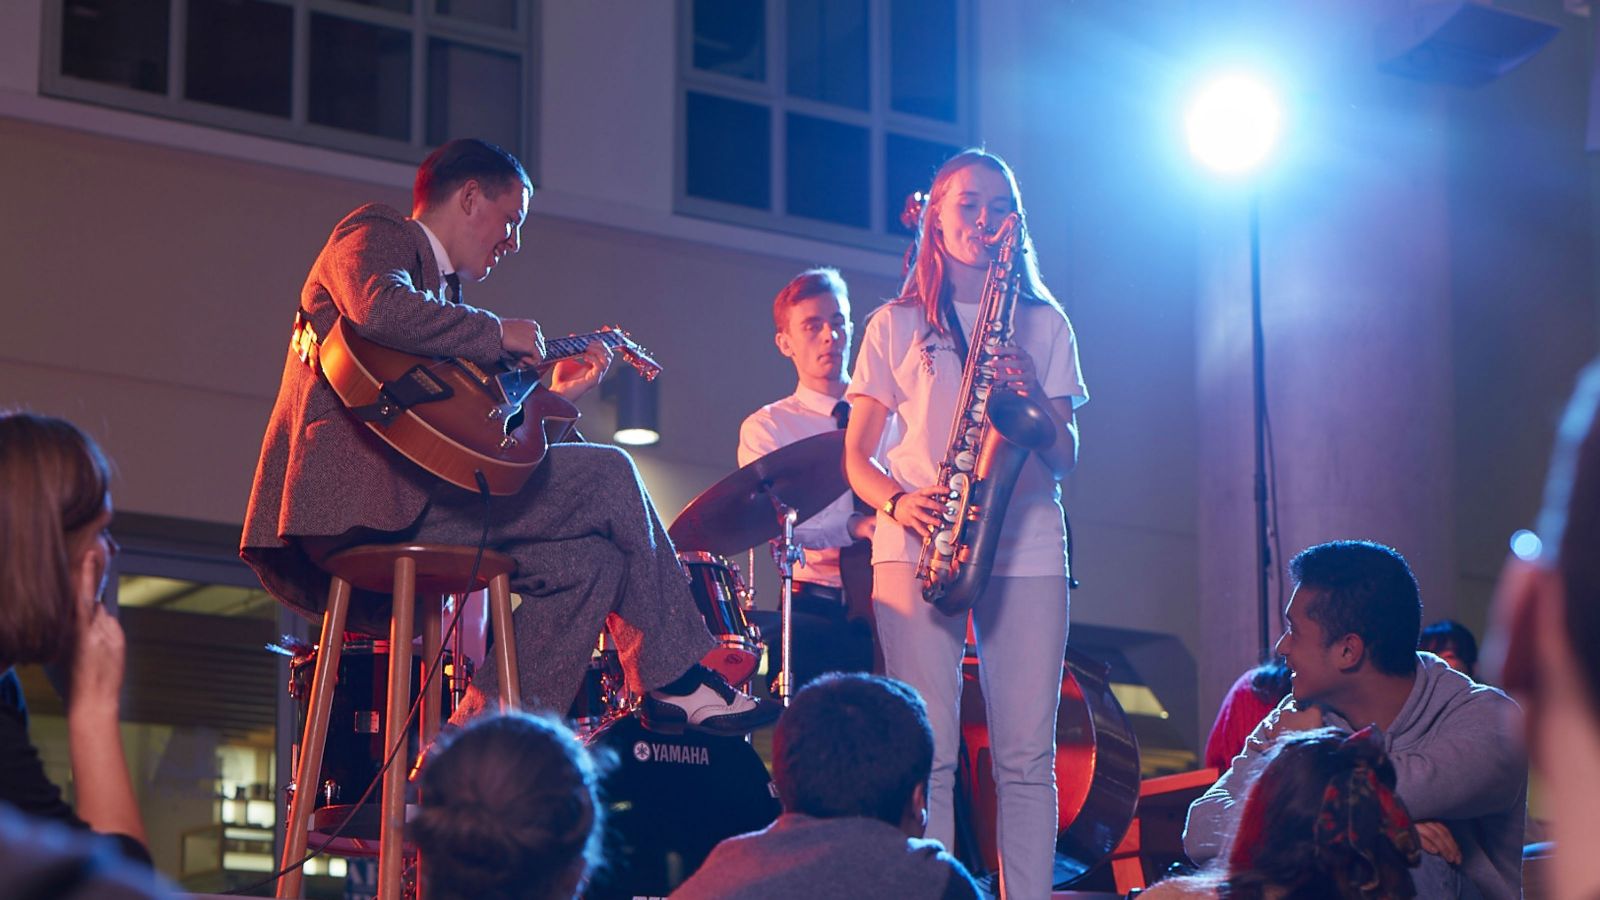 Jazz musicians playing for an audience.